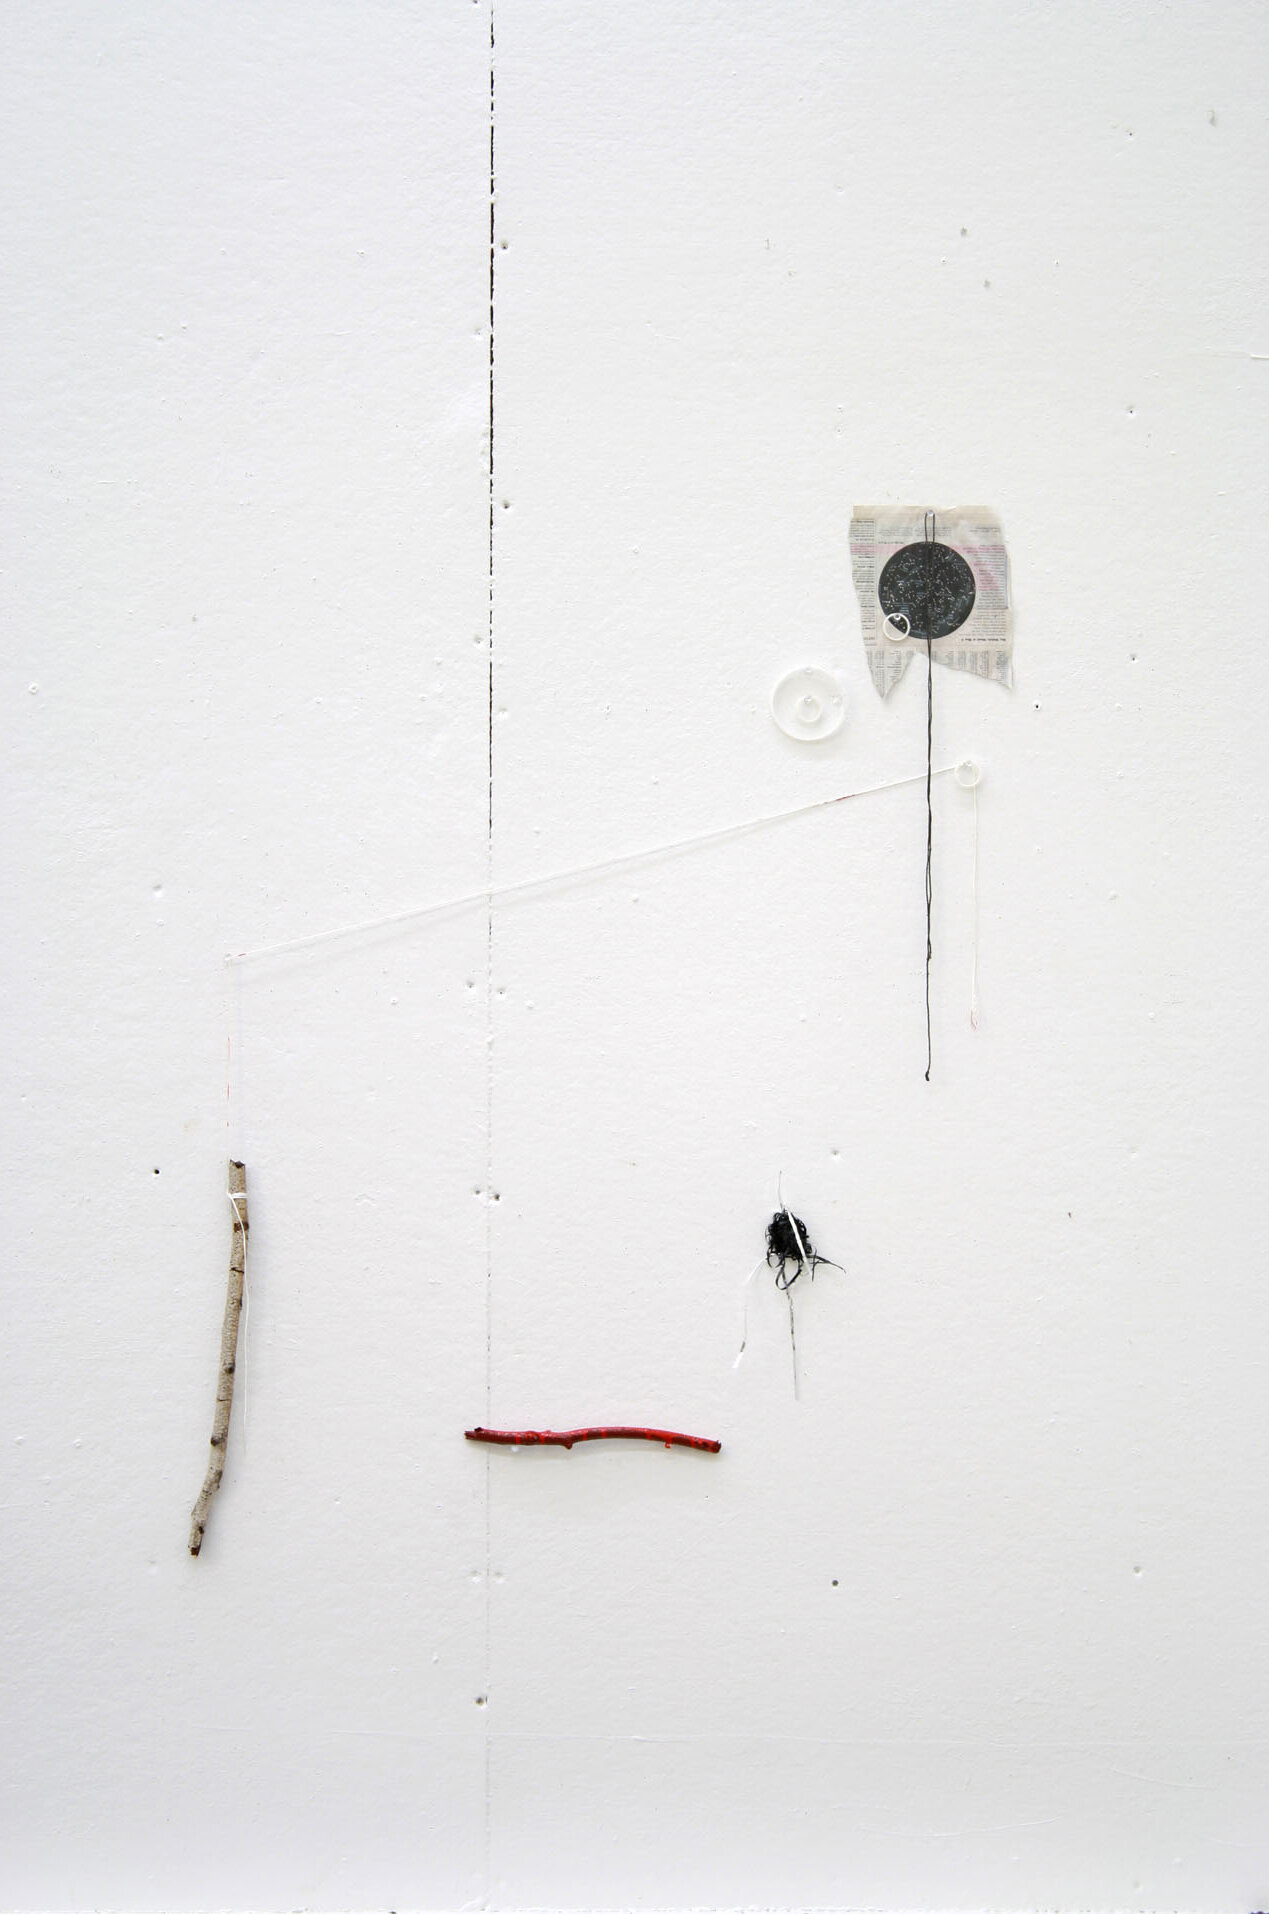    Chapel Series    Wood branches, rope, fabric, glue, local detritus, tape on wall 